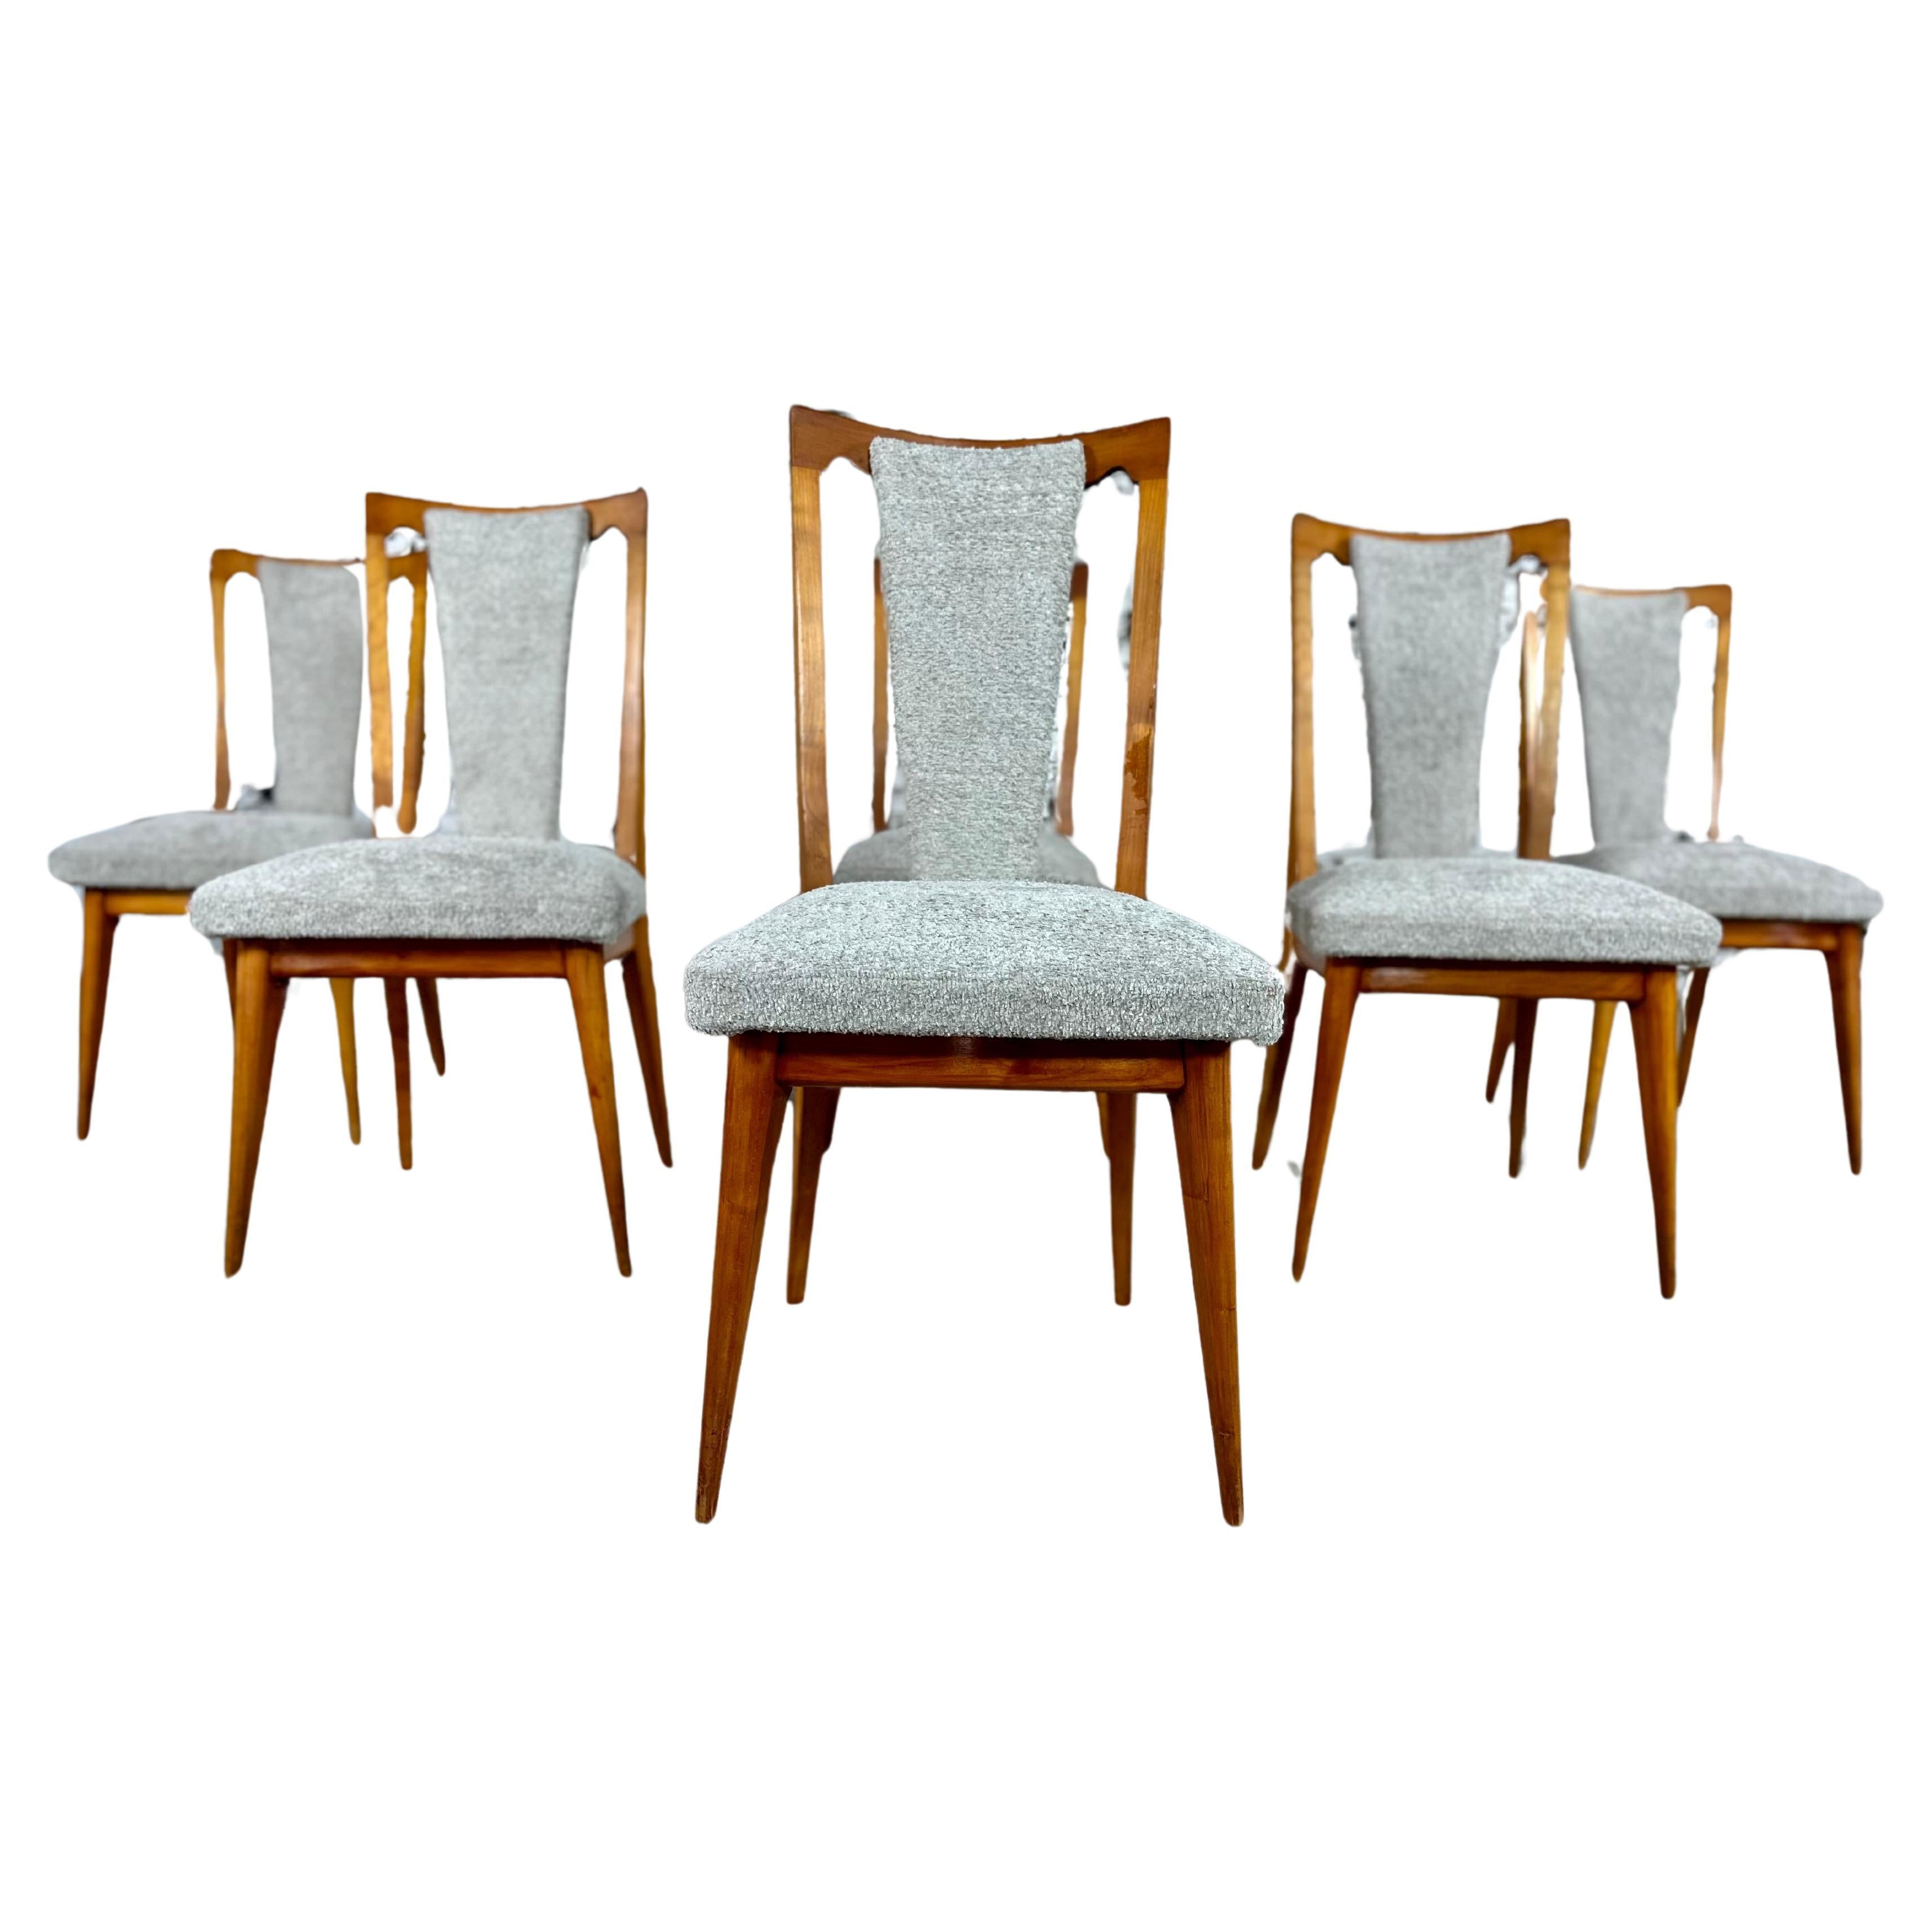 French Art Deco Styled Dining Chairs, Newly Upholstered - Set of 6 For Sale